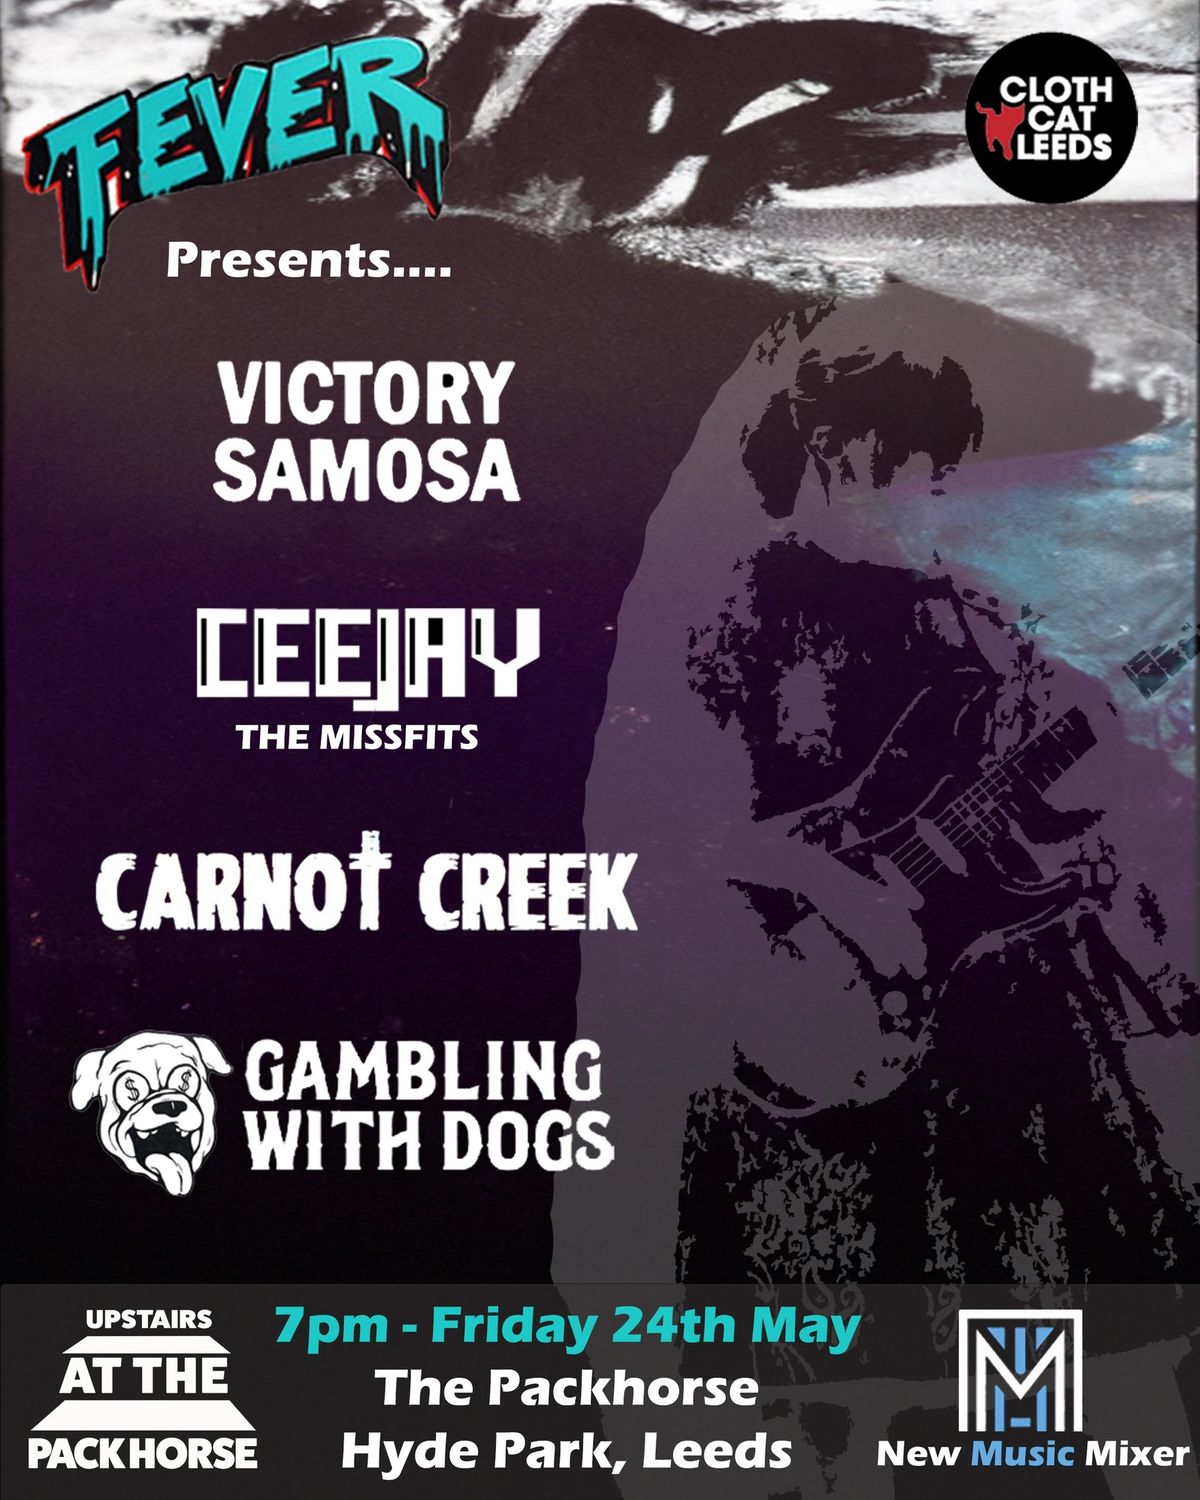 FEVER Charity Showcase 24th May